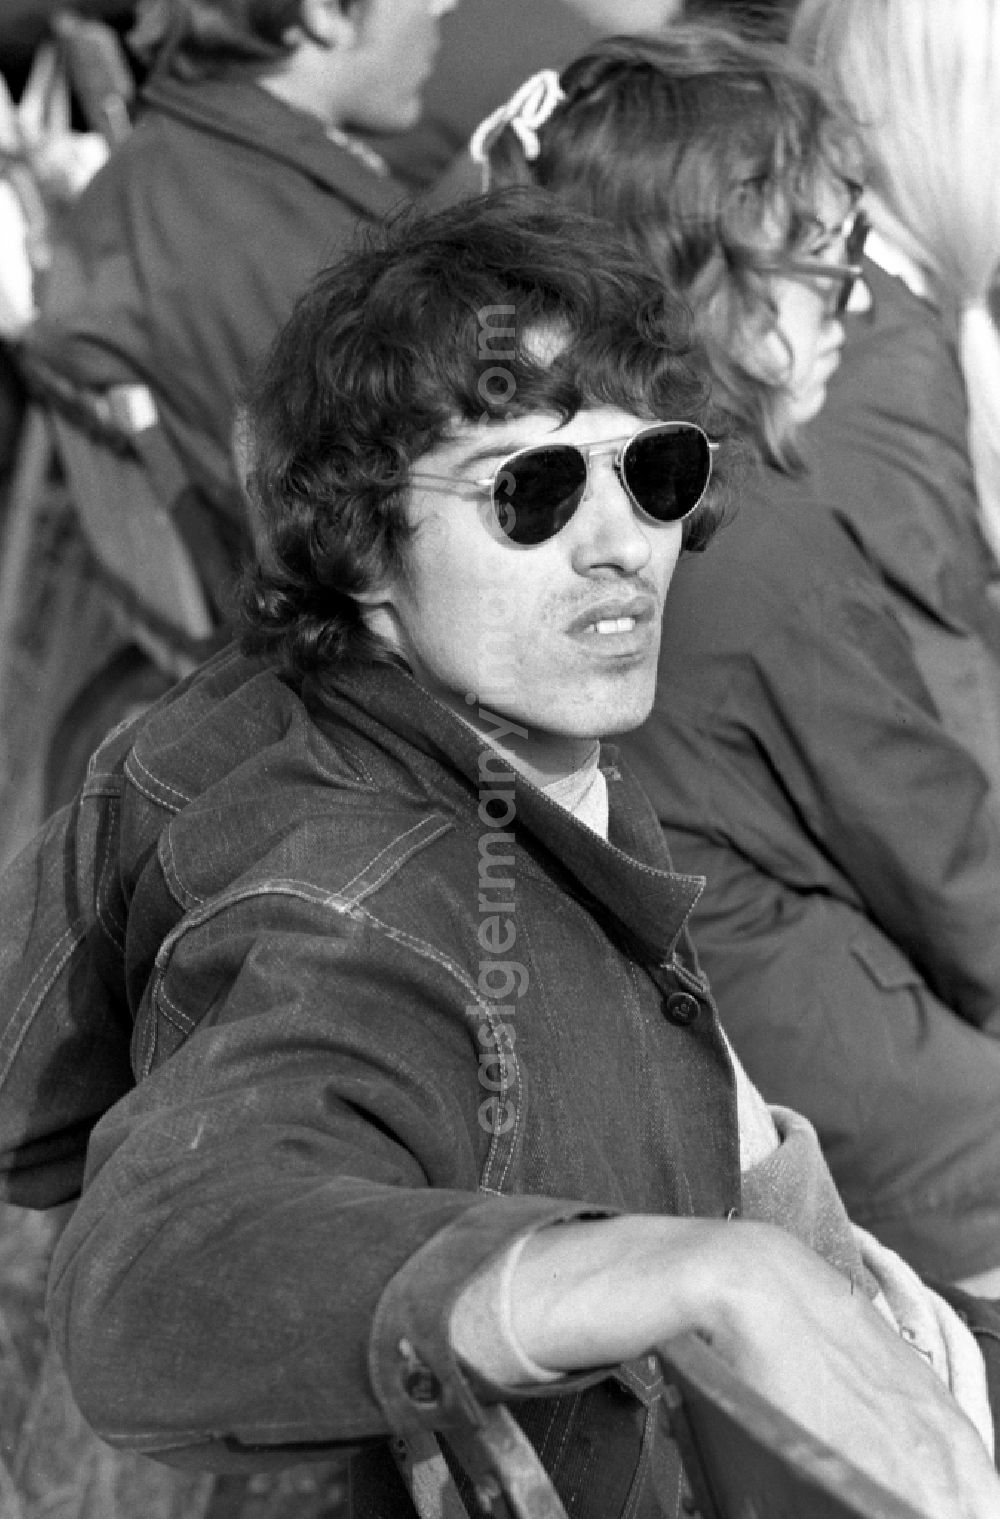 Wanzleben-Börde: Man with sunglasses and jeans at an open-air concert in Wanzleben-Boerde, Saxony-Anhalt in the territory of the former GDR, German Democratic Republic